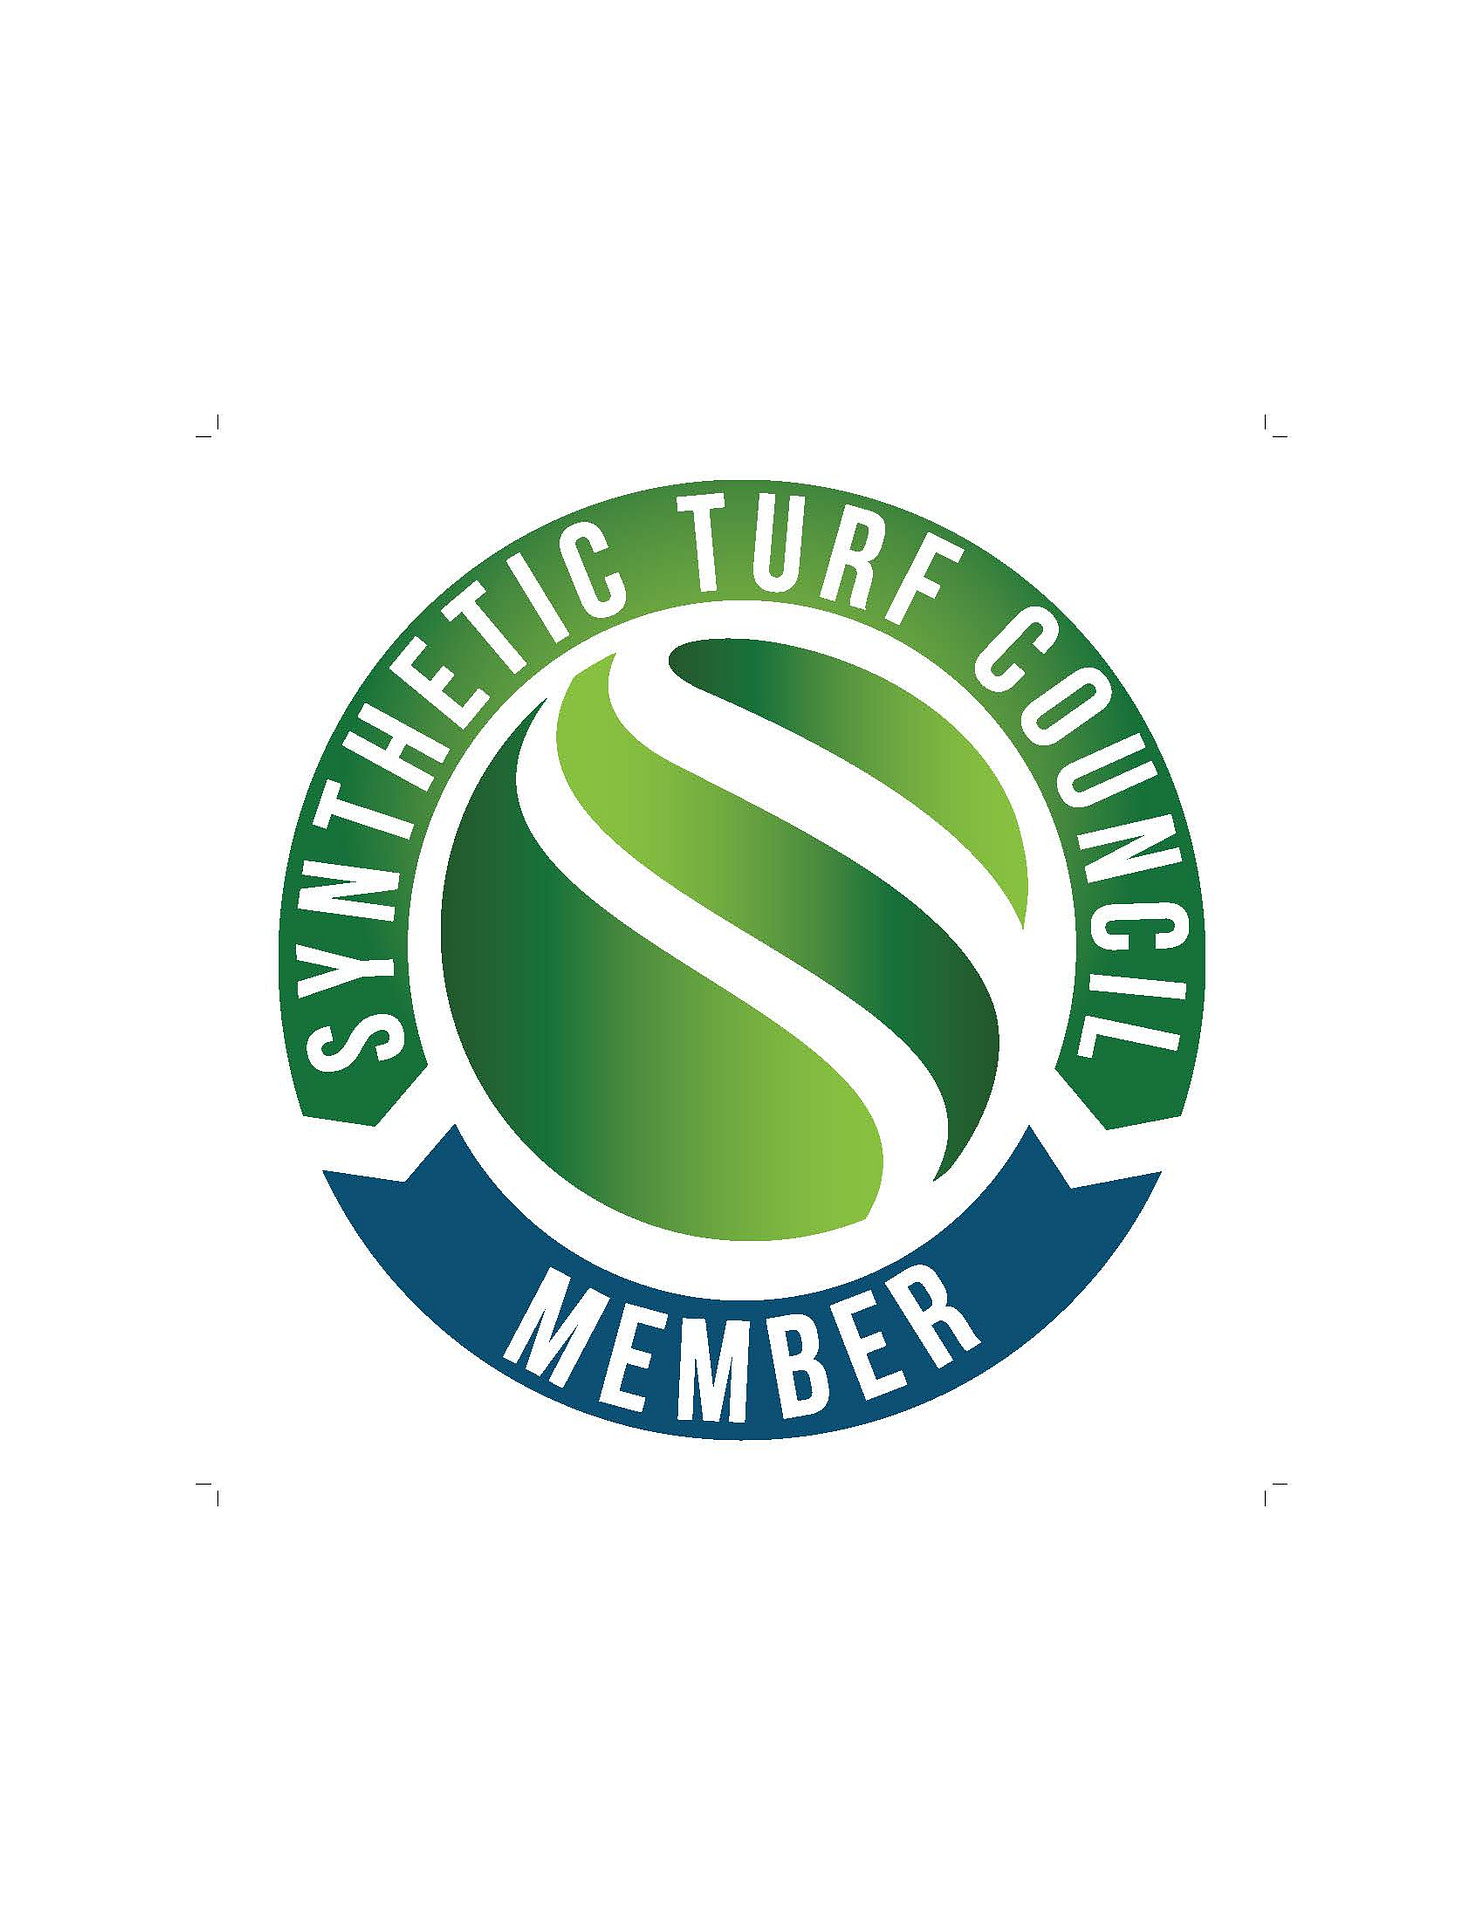 Synthetic Turf Council 